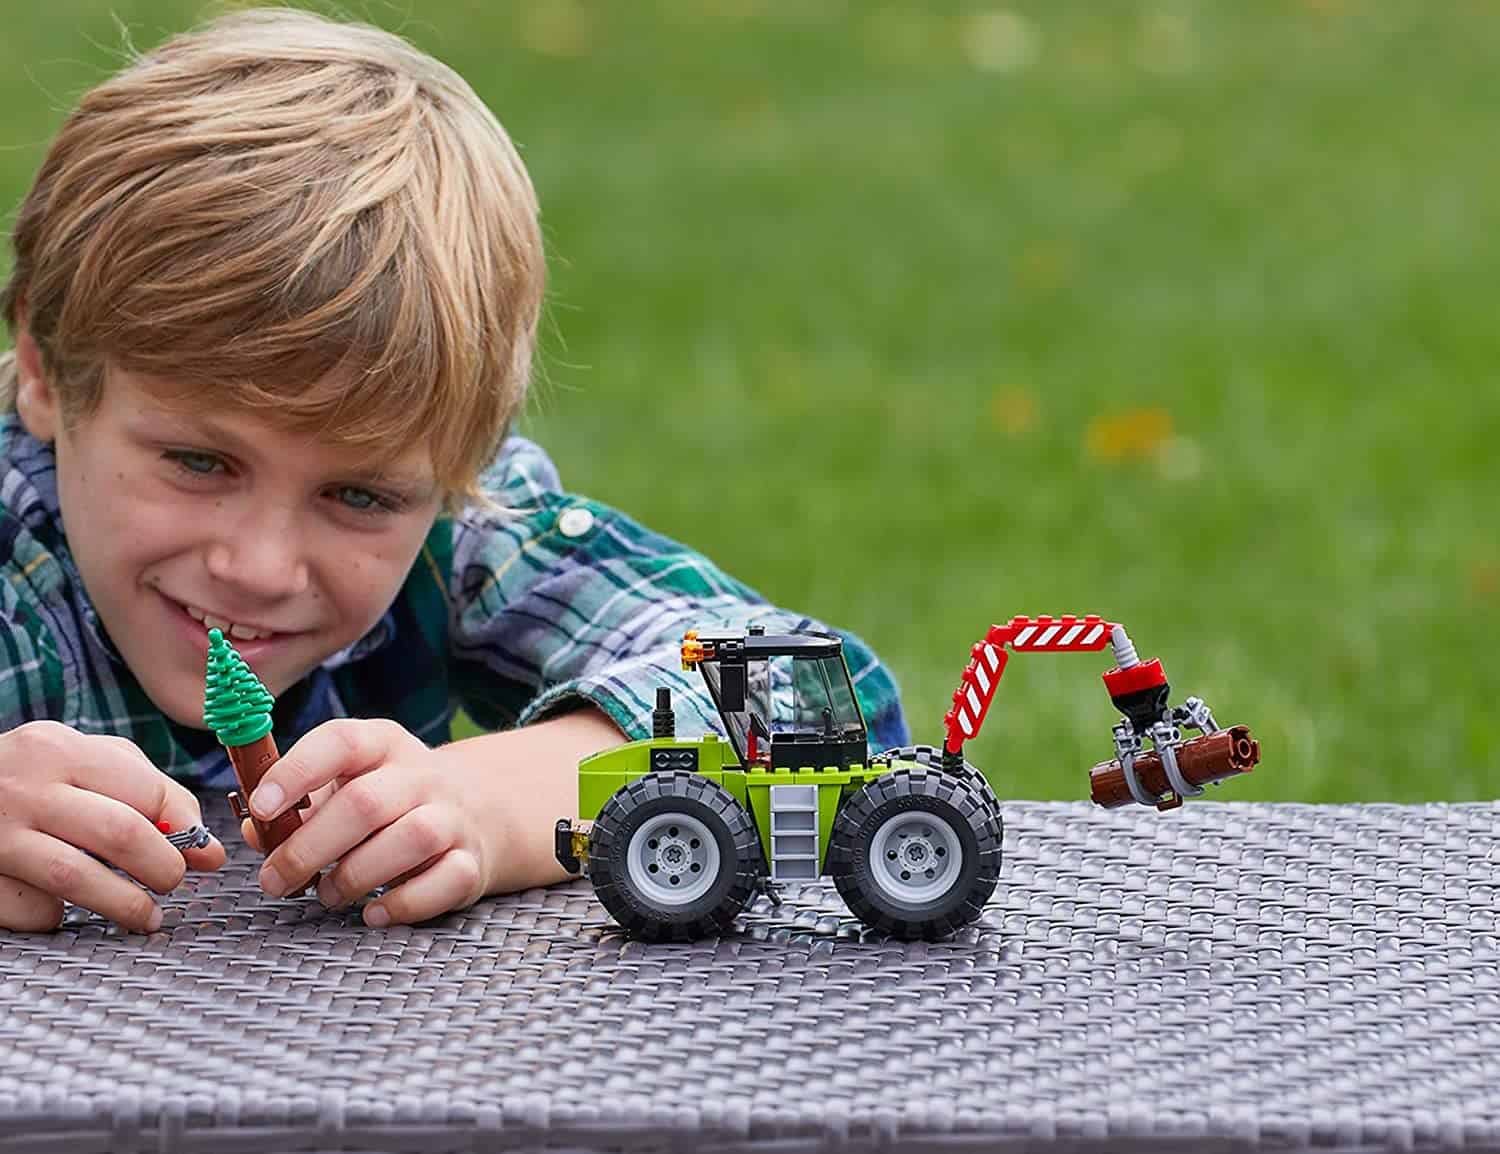 Best Lego tractor: LEGO City Forest Tractor 60181